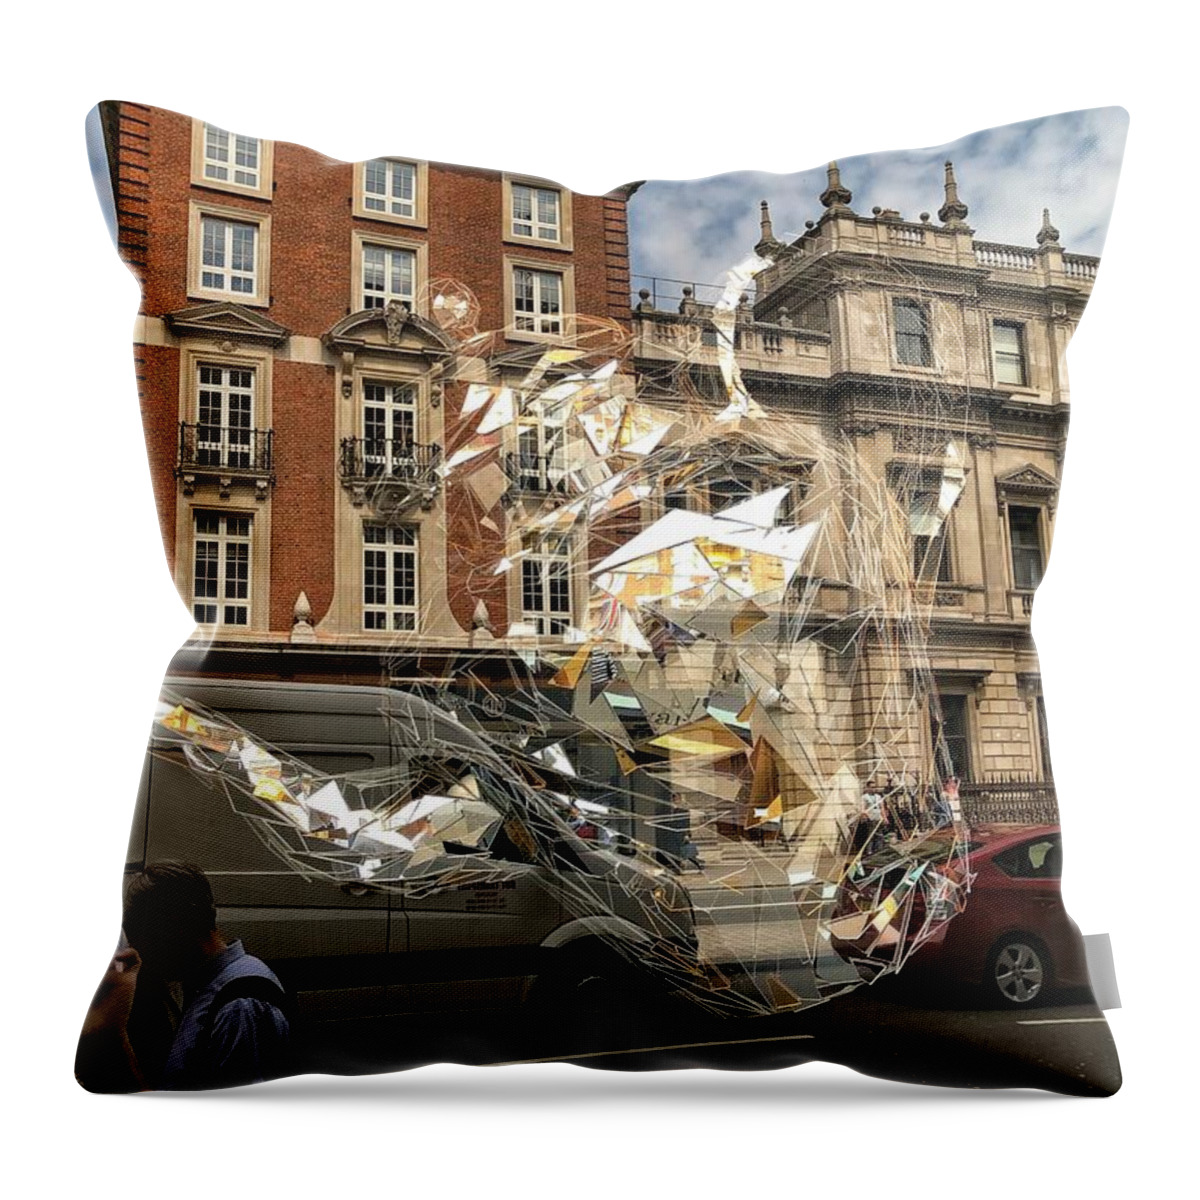 Reflections Throw Pillow featuring the photograph London Tea Time by Diana Rajala